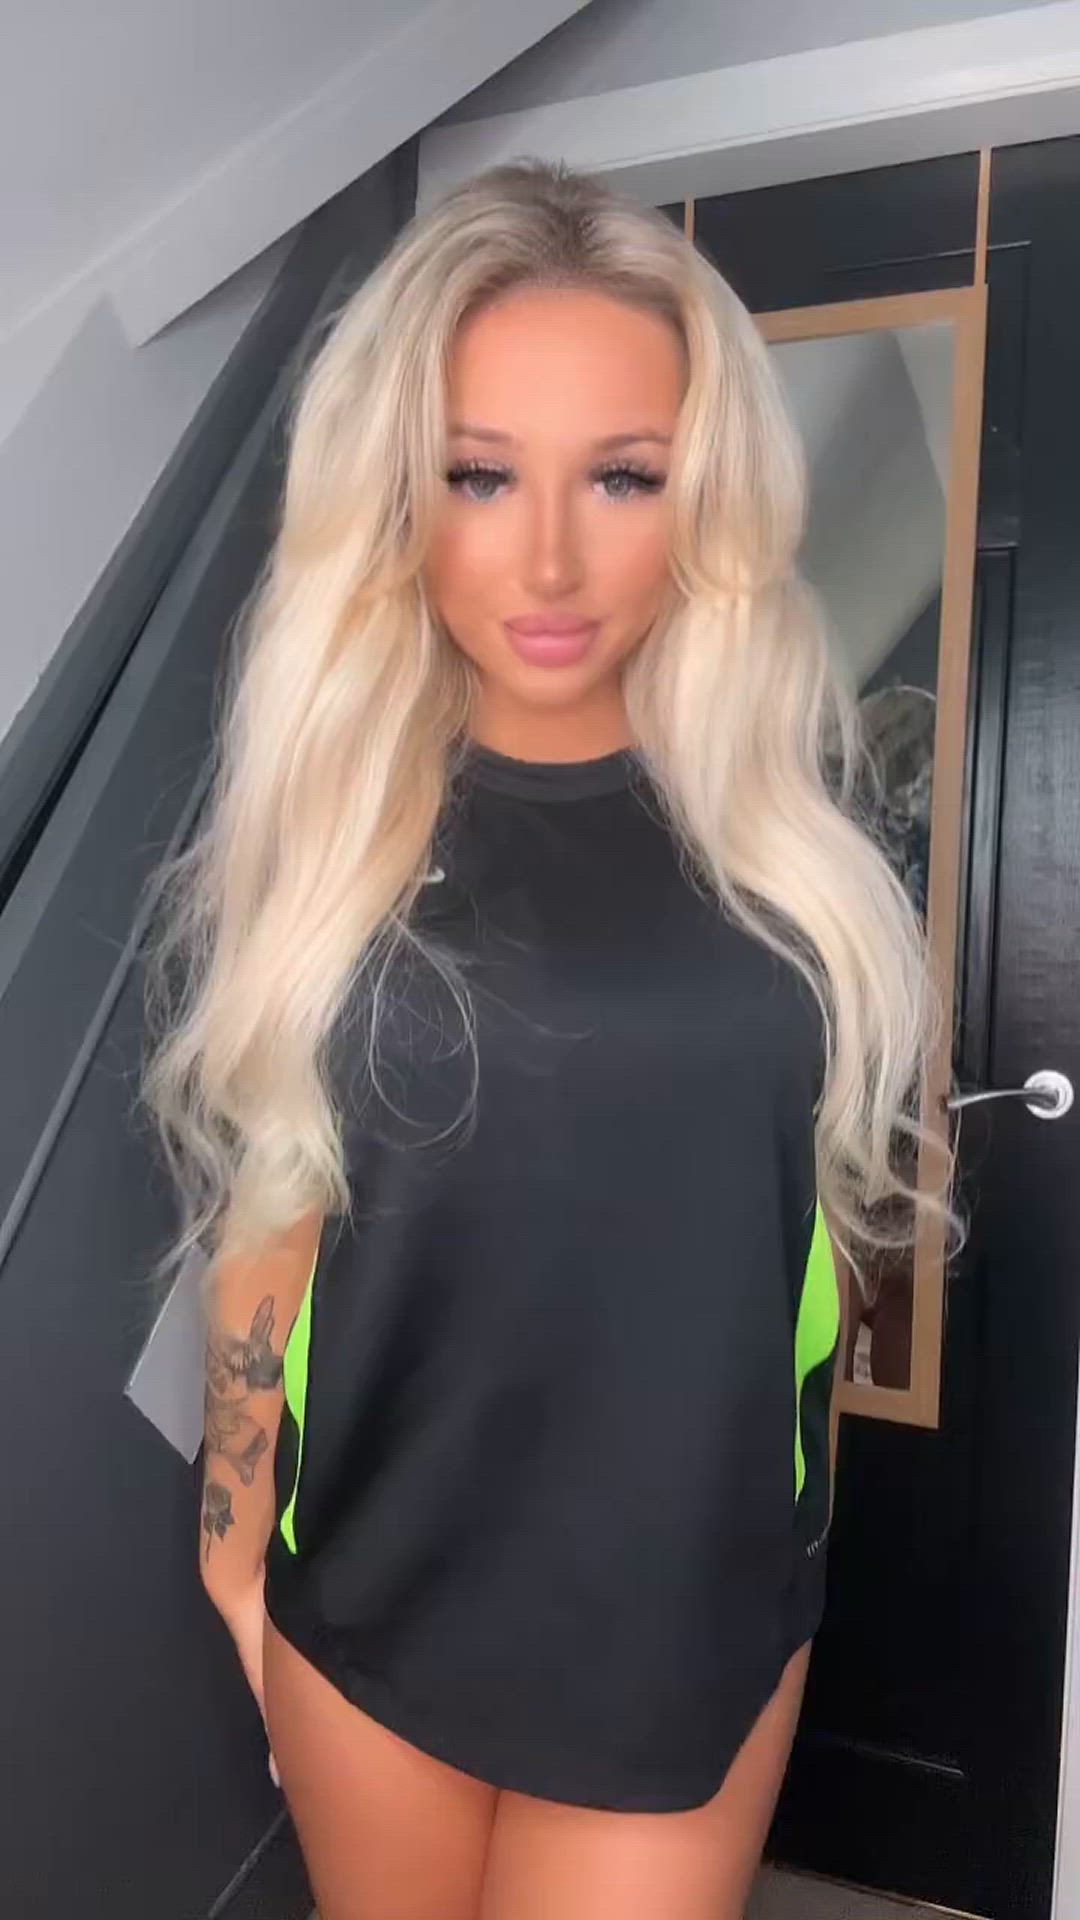 Tits porn video with onlyfans model onlysophielouise <strong>@sophielouise1x</strong>